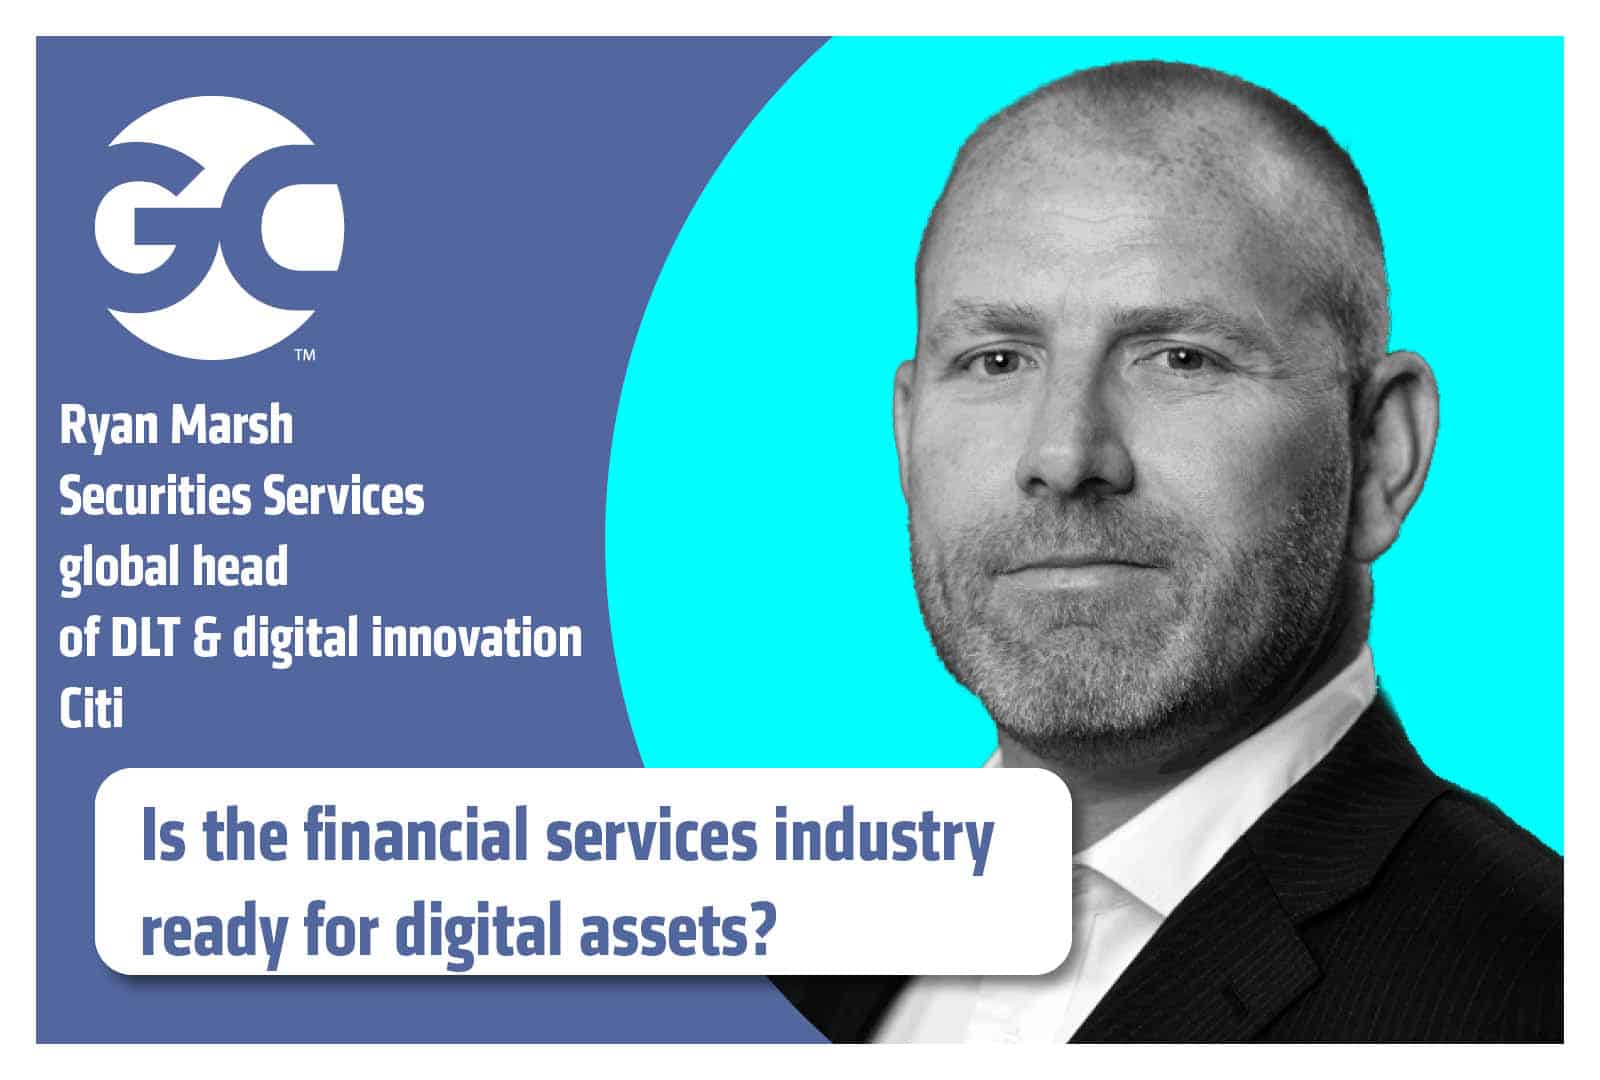 Digital assets move mainstream, according to joint GC and Citi ...